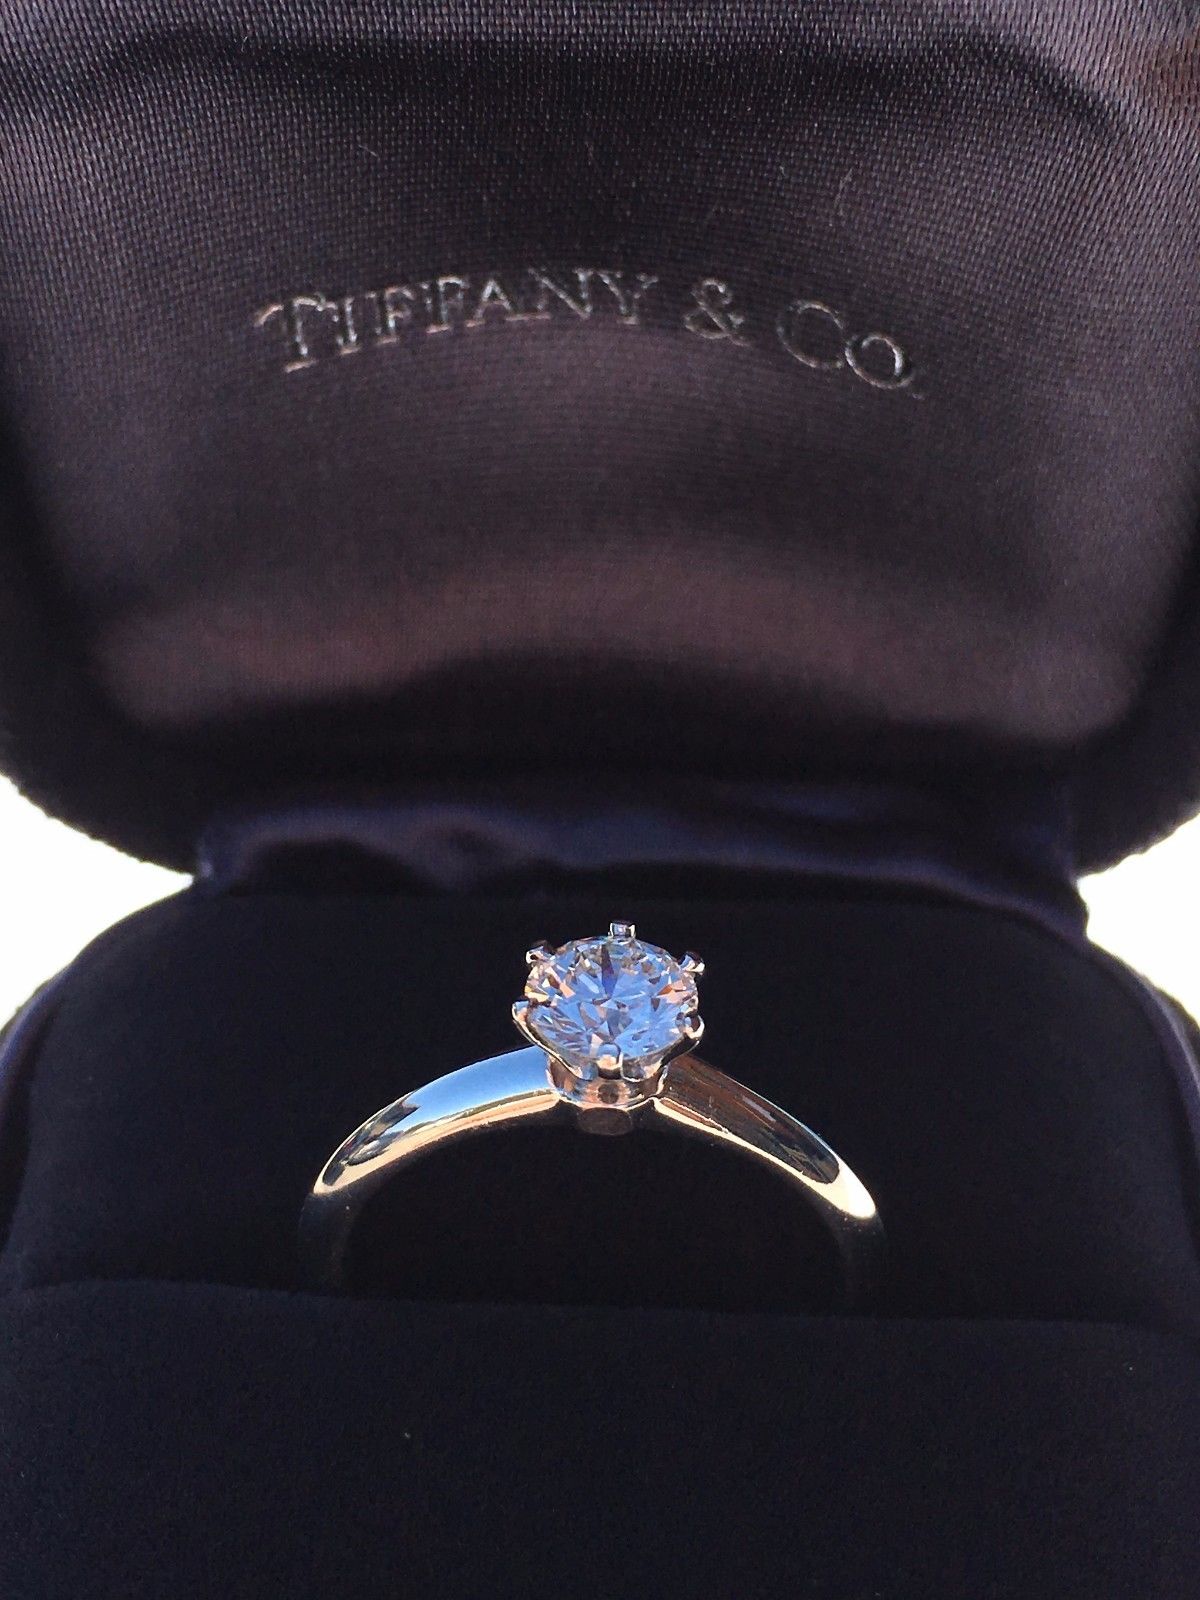 Tiffany Co Diamond Engagement  Ring  Consignment  102 